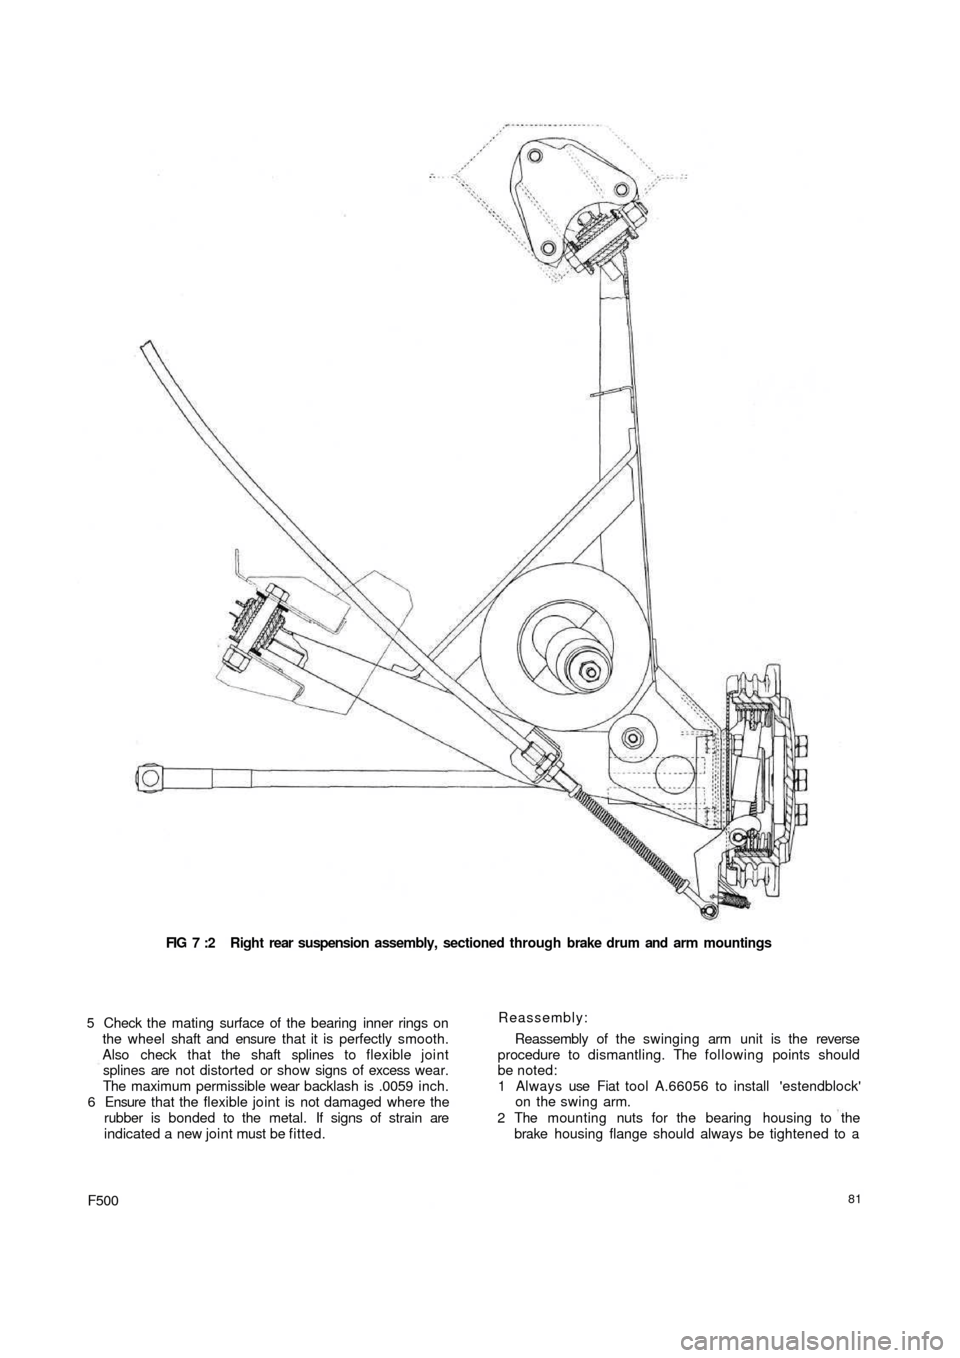 FIAT 500 1971 1.G Workshop Manual FIG 7 :2  Right rear suspension  assembly, sectioned through brake drum and arm mountings
5 Check the mating surface of the bearing inner rings on
the wheel shaft and ensure that it is perfectly smoot